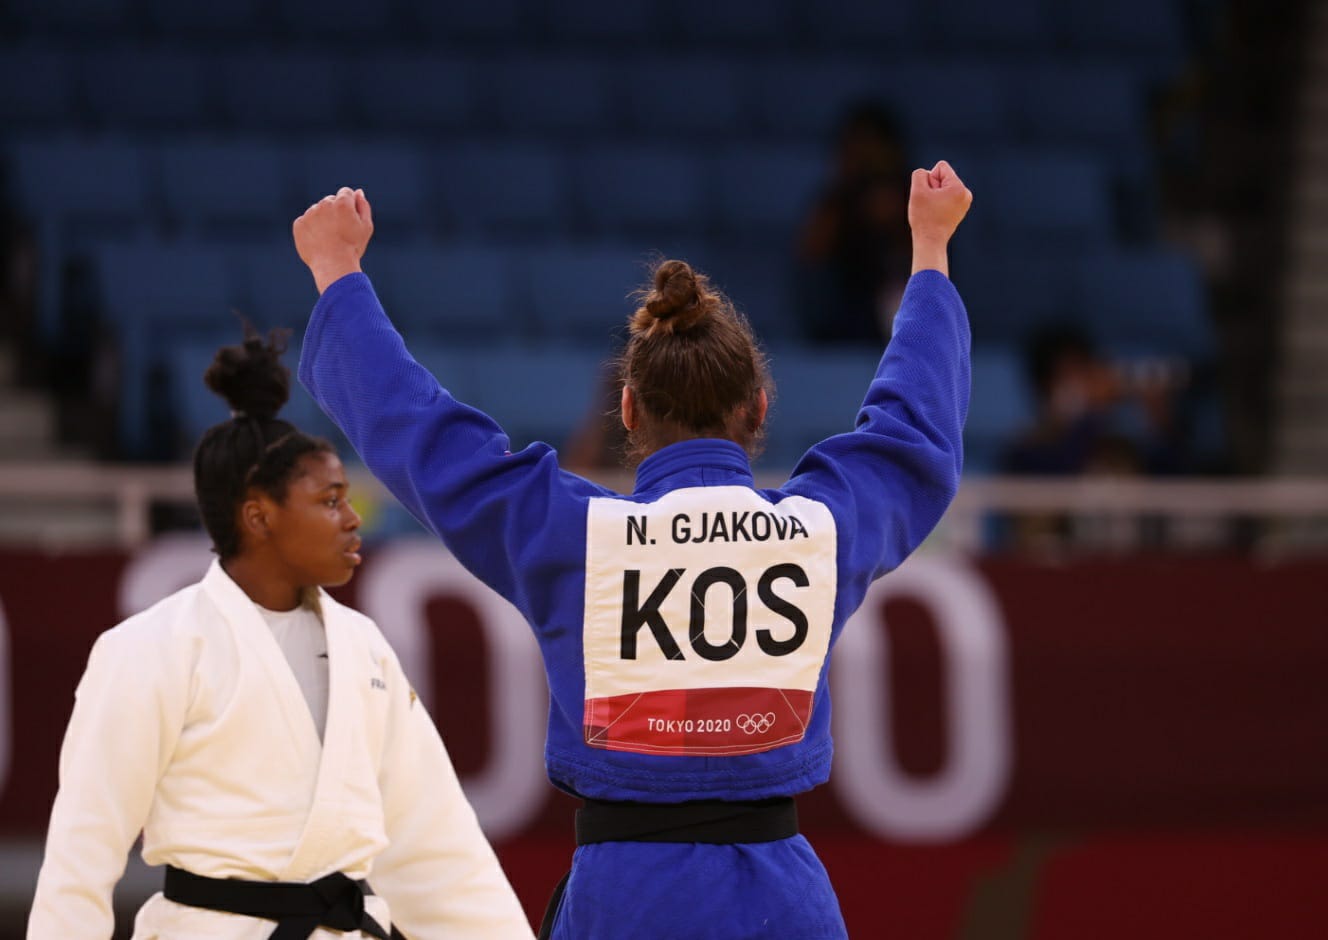 KOSOVO TAKE YET ANOTHER TITLE WHILE GEORGIA PICKS UP SECOND SILVER